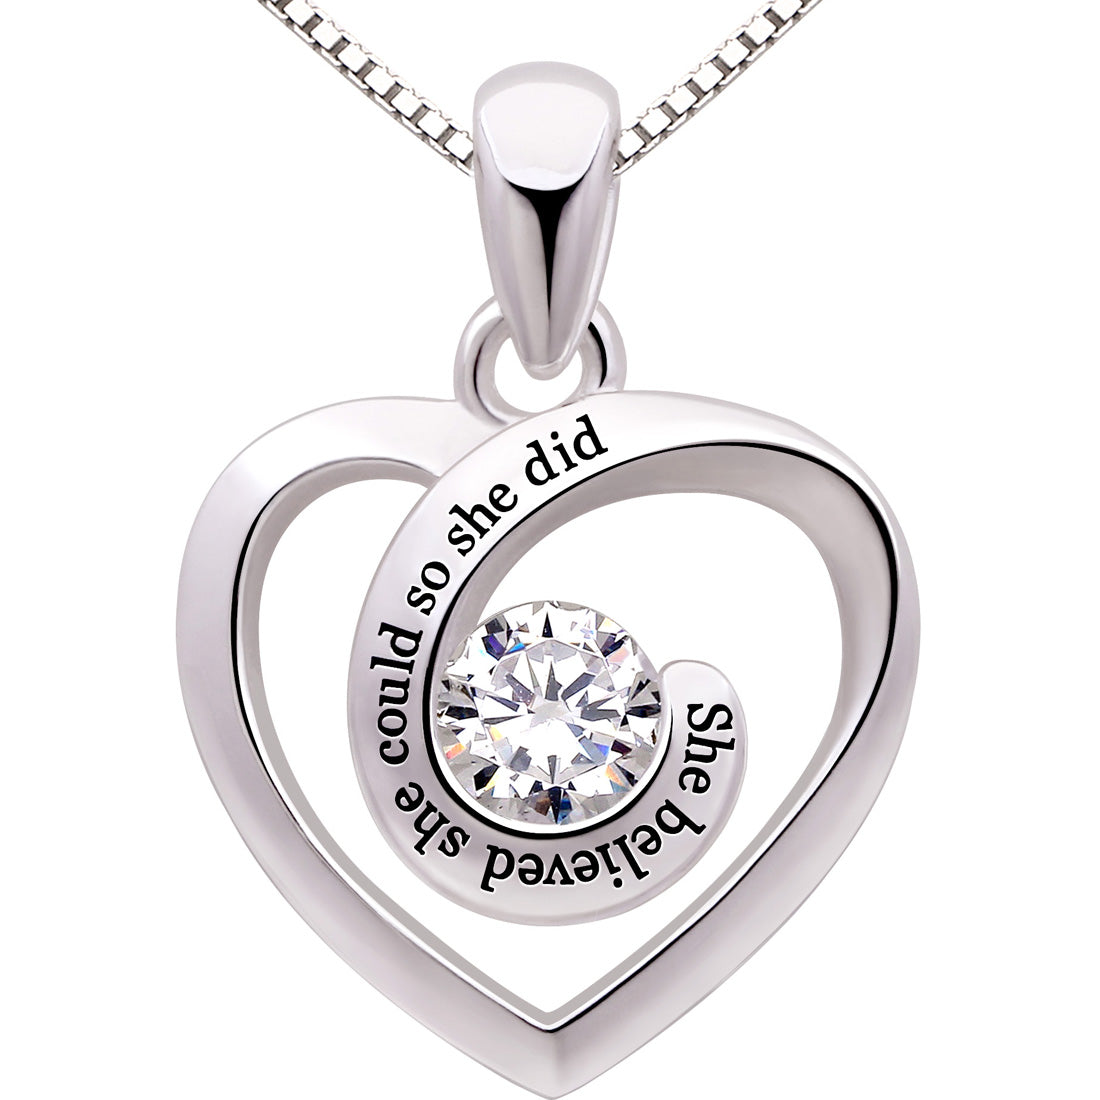 ALOV Jewelry Sterling Silver "She believed she could so she did" Love Heart Cubic Zirconia Pendant Necklace